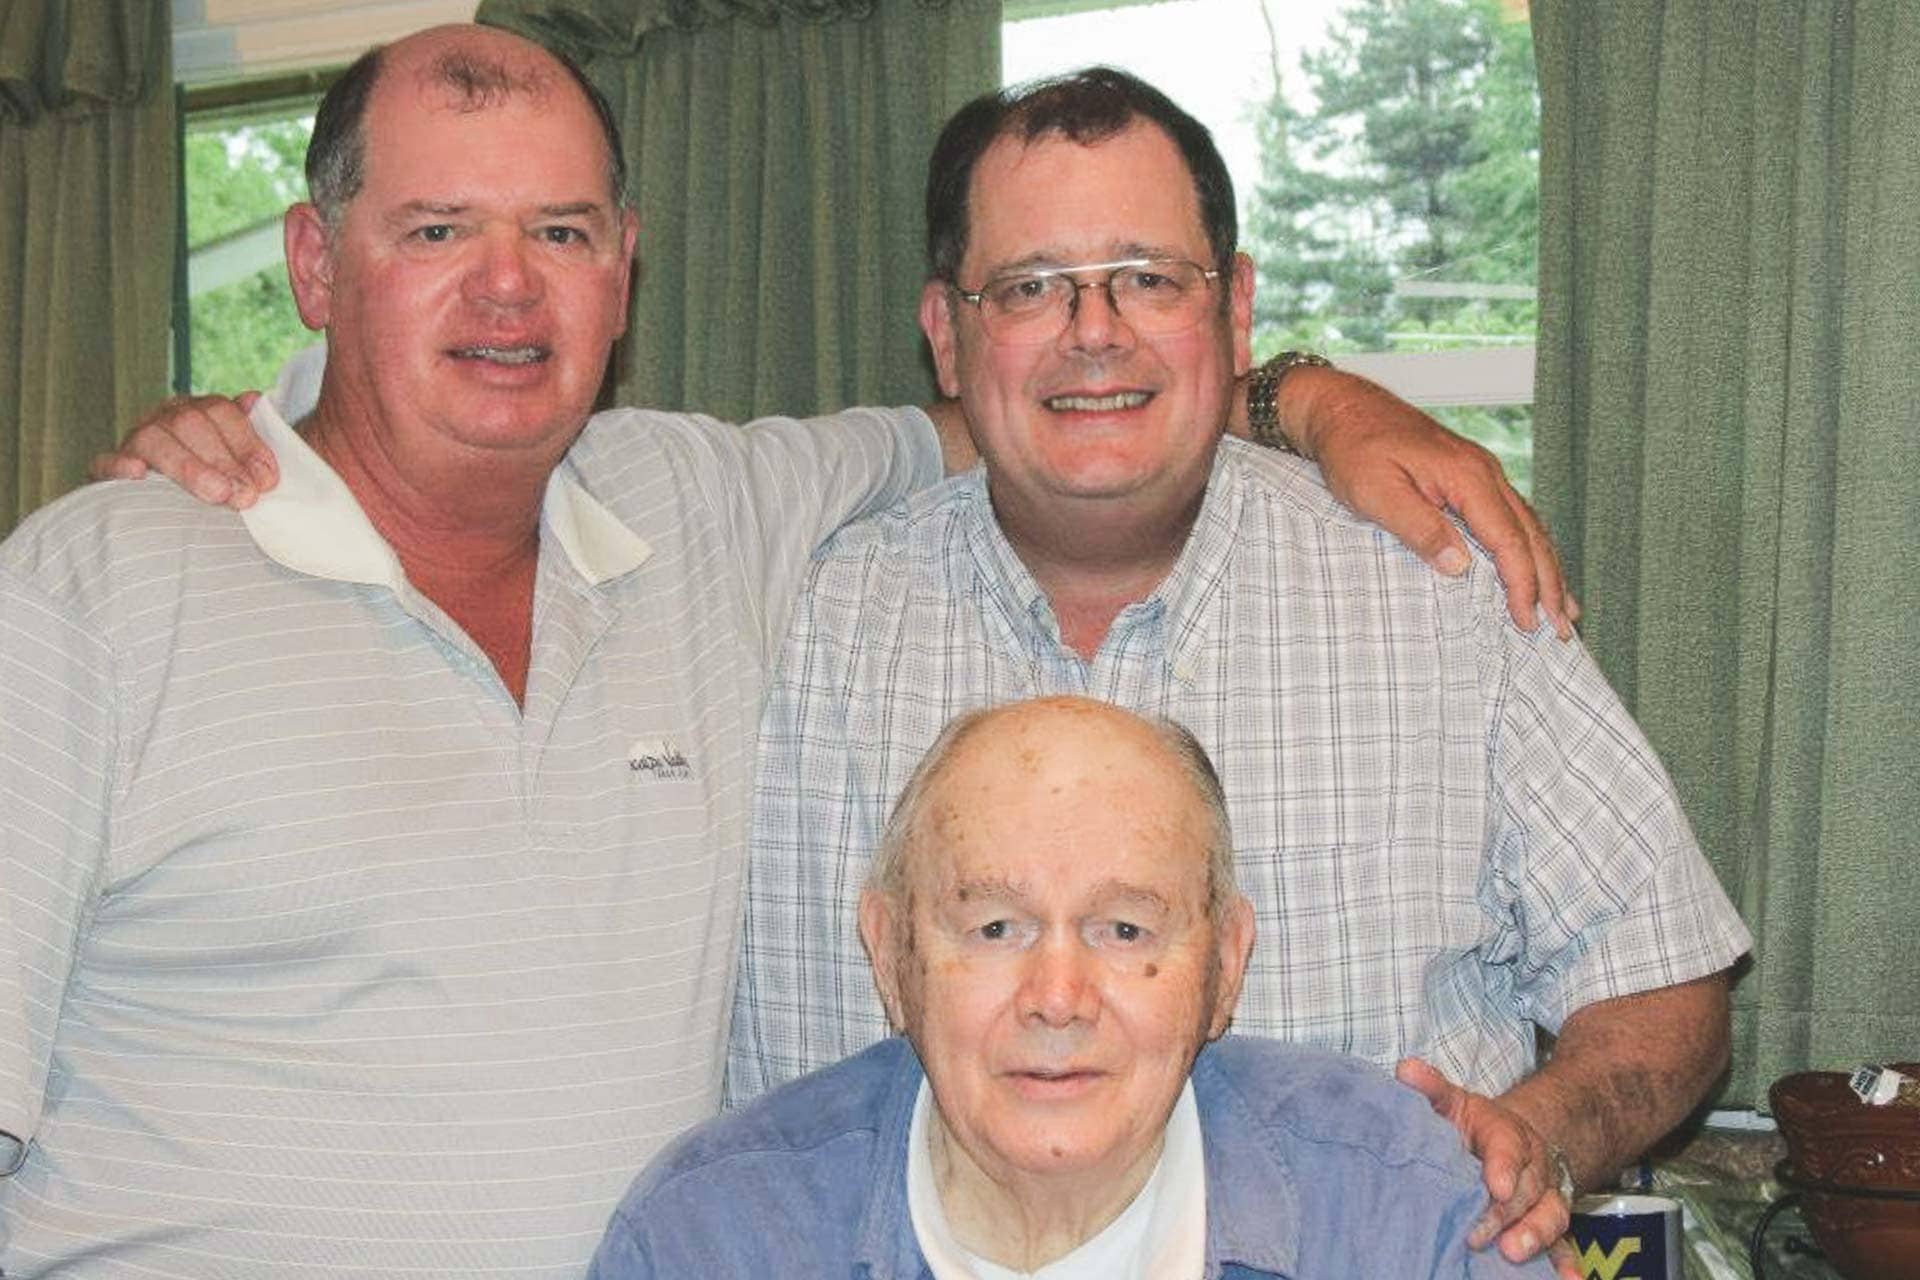 Chad and Steve Shaffer with their late father, Charles.